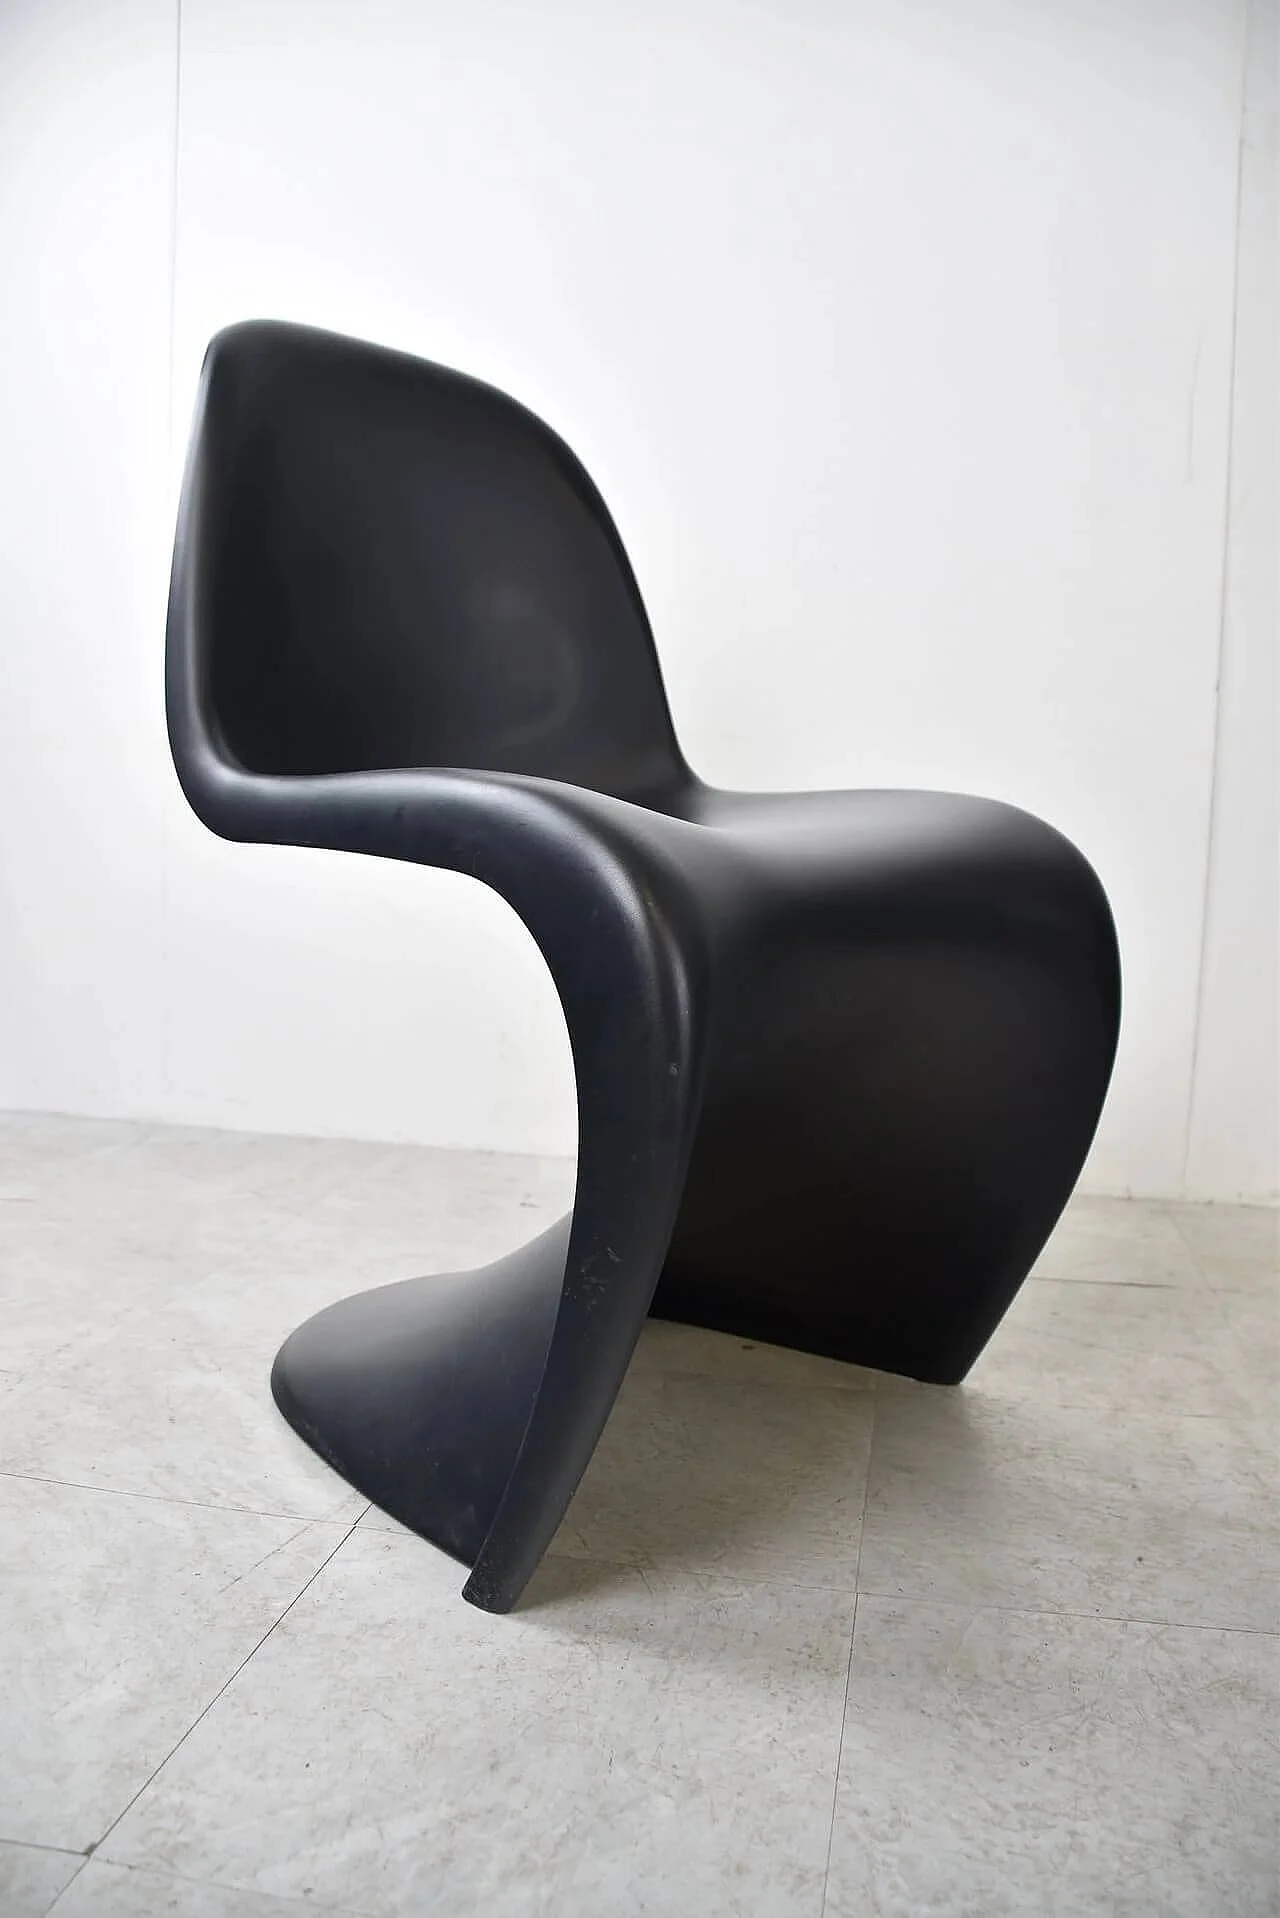 4 Panton Chair S in polypropylene by Verner Panton for Vitra 8